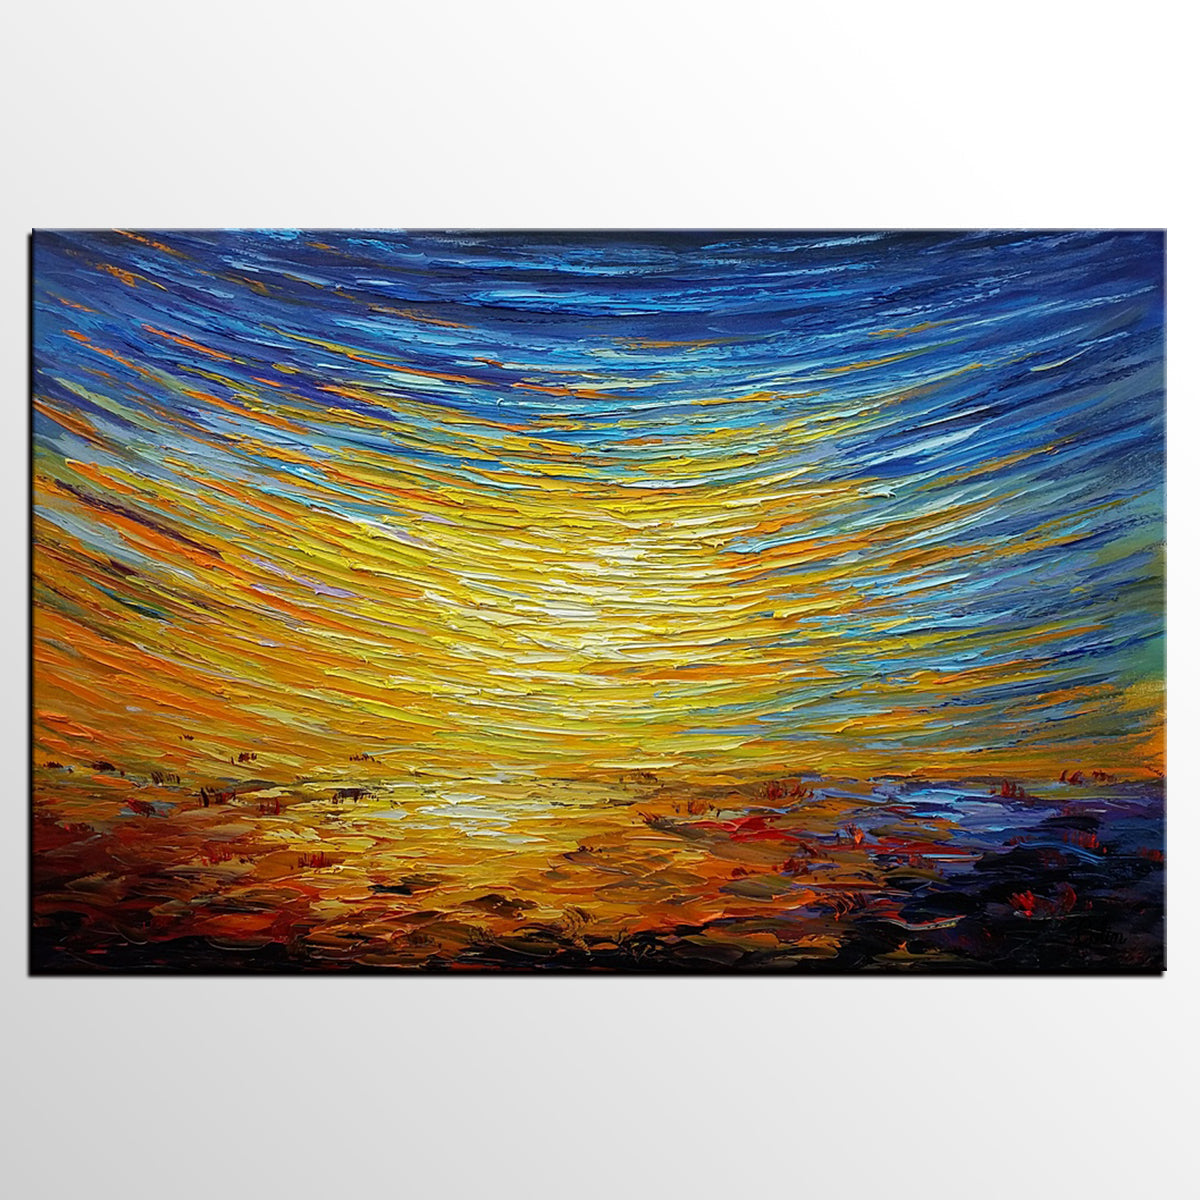 Abstract Landscape Painting, Custom Canvas Painting for Sale, Large Oil Painting on Canvas, Palette Knife Paintings, Buy Art Online-Art Painting Canvas